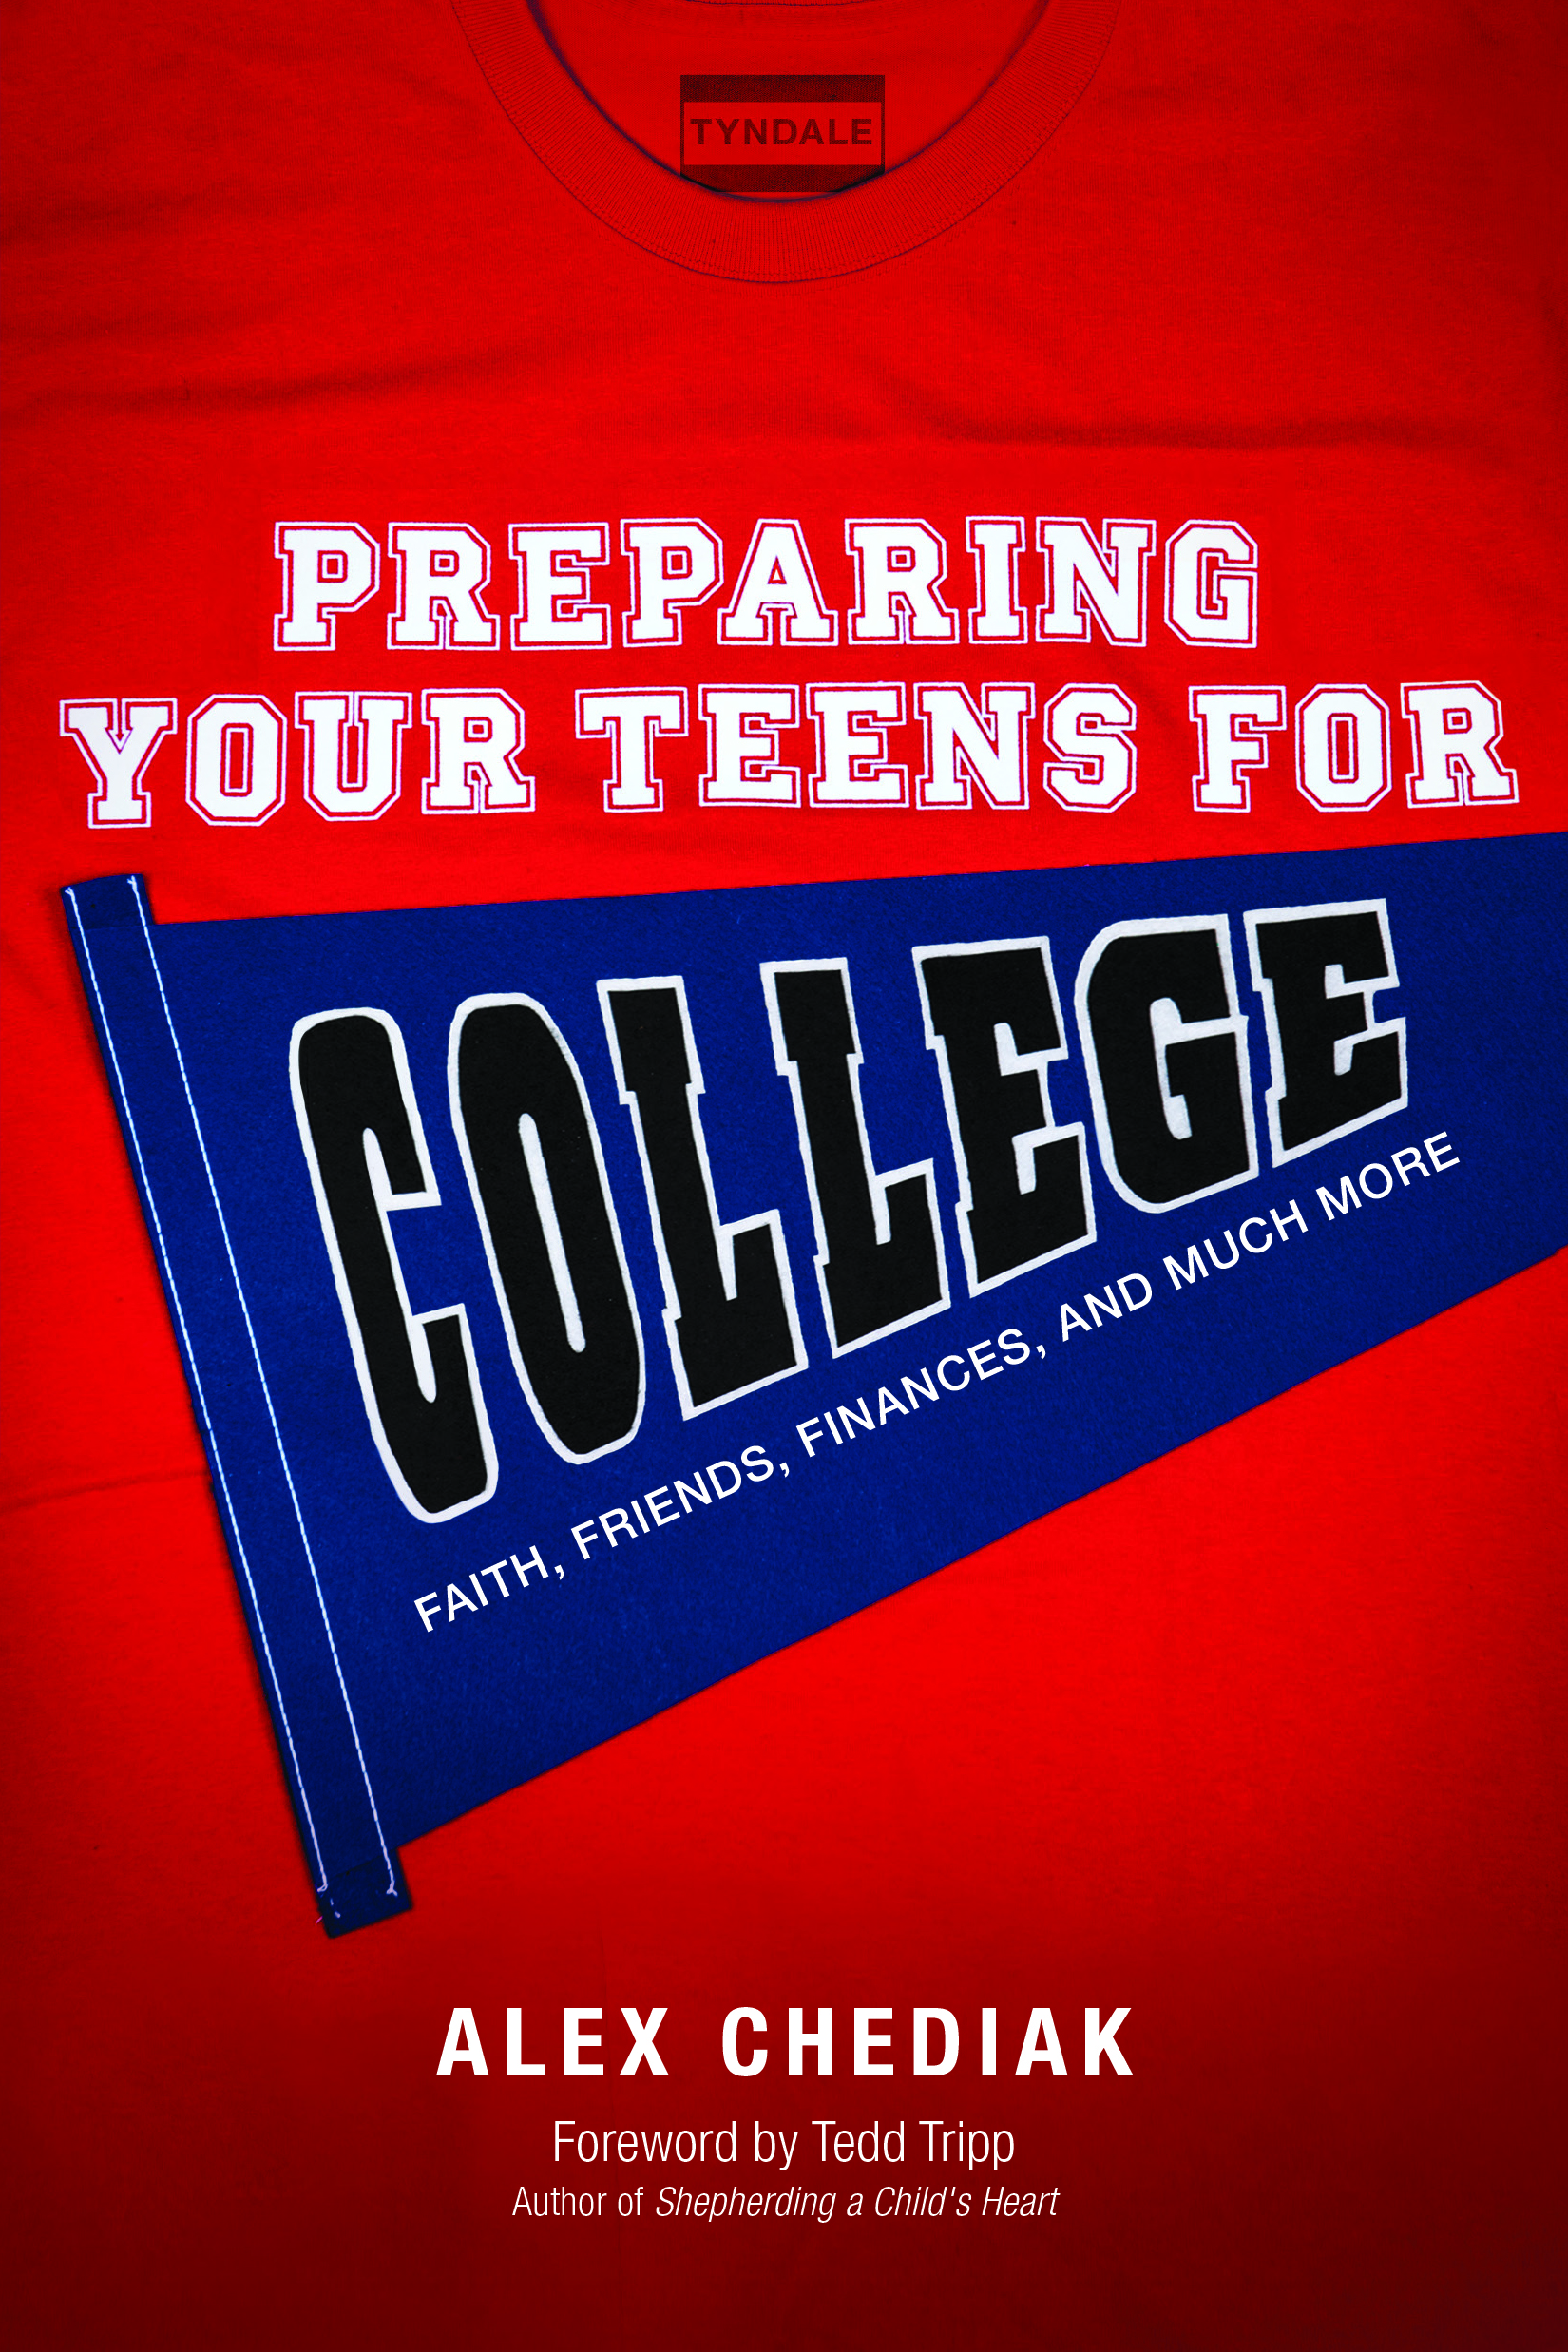 Interview by Matt Mitchell on Preparing Your Teens for College